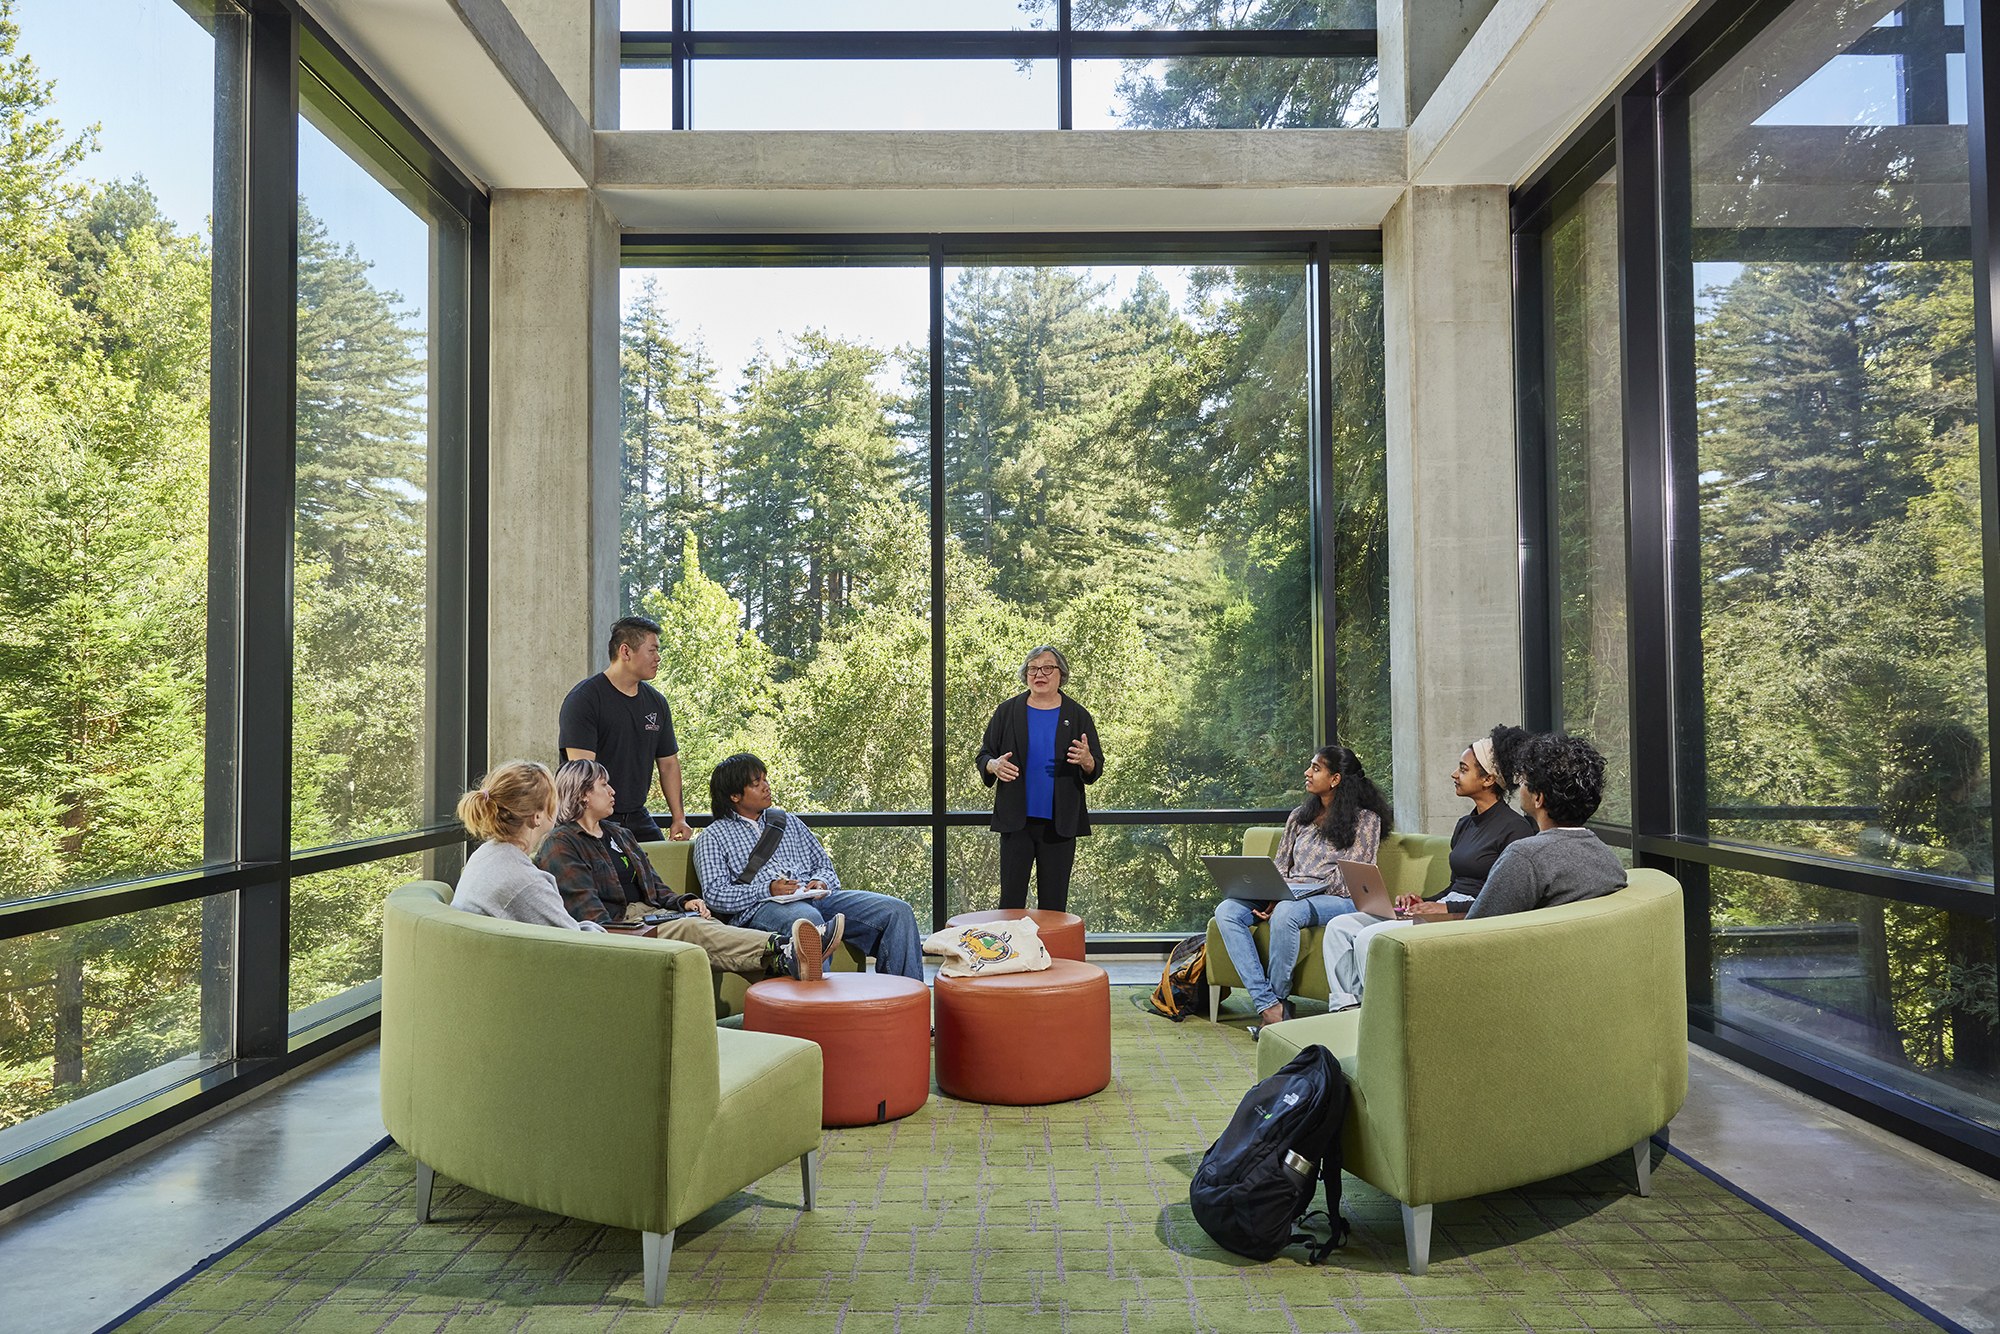 Chancellor Larive in the library talking with students in front of a big glass window with redwood trees in the background